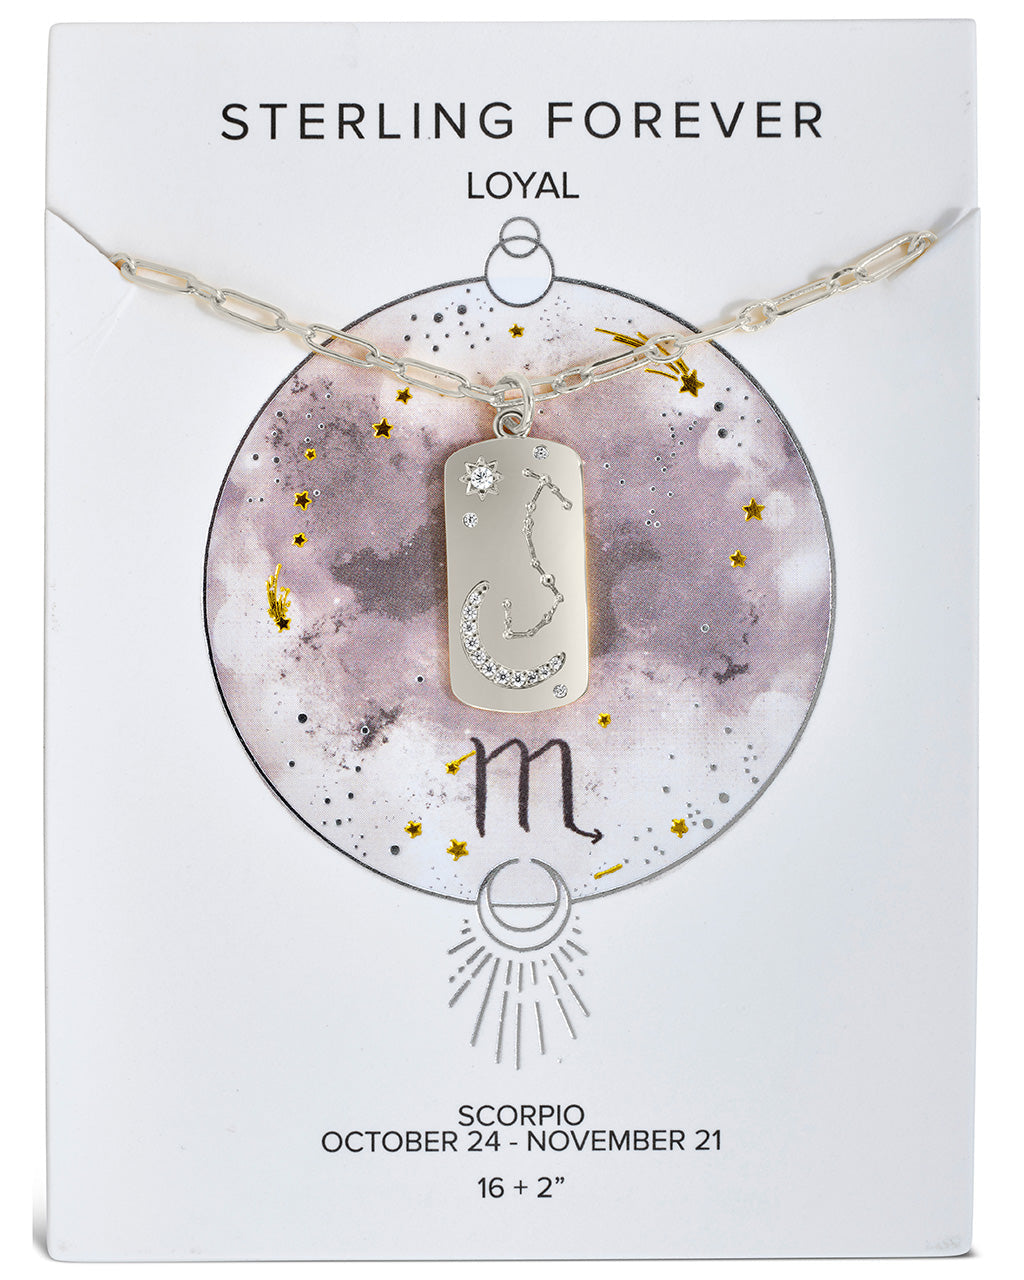 Constellation Dog Tag Necklace Necklace Sterling Forever Silver Scorpio (Oct 23 - Nov 21) 